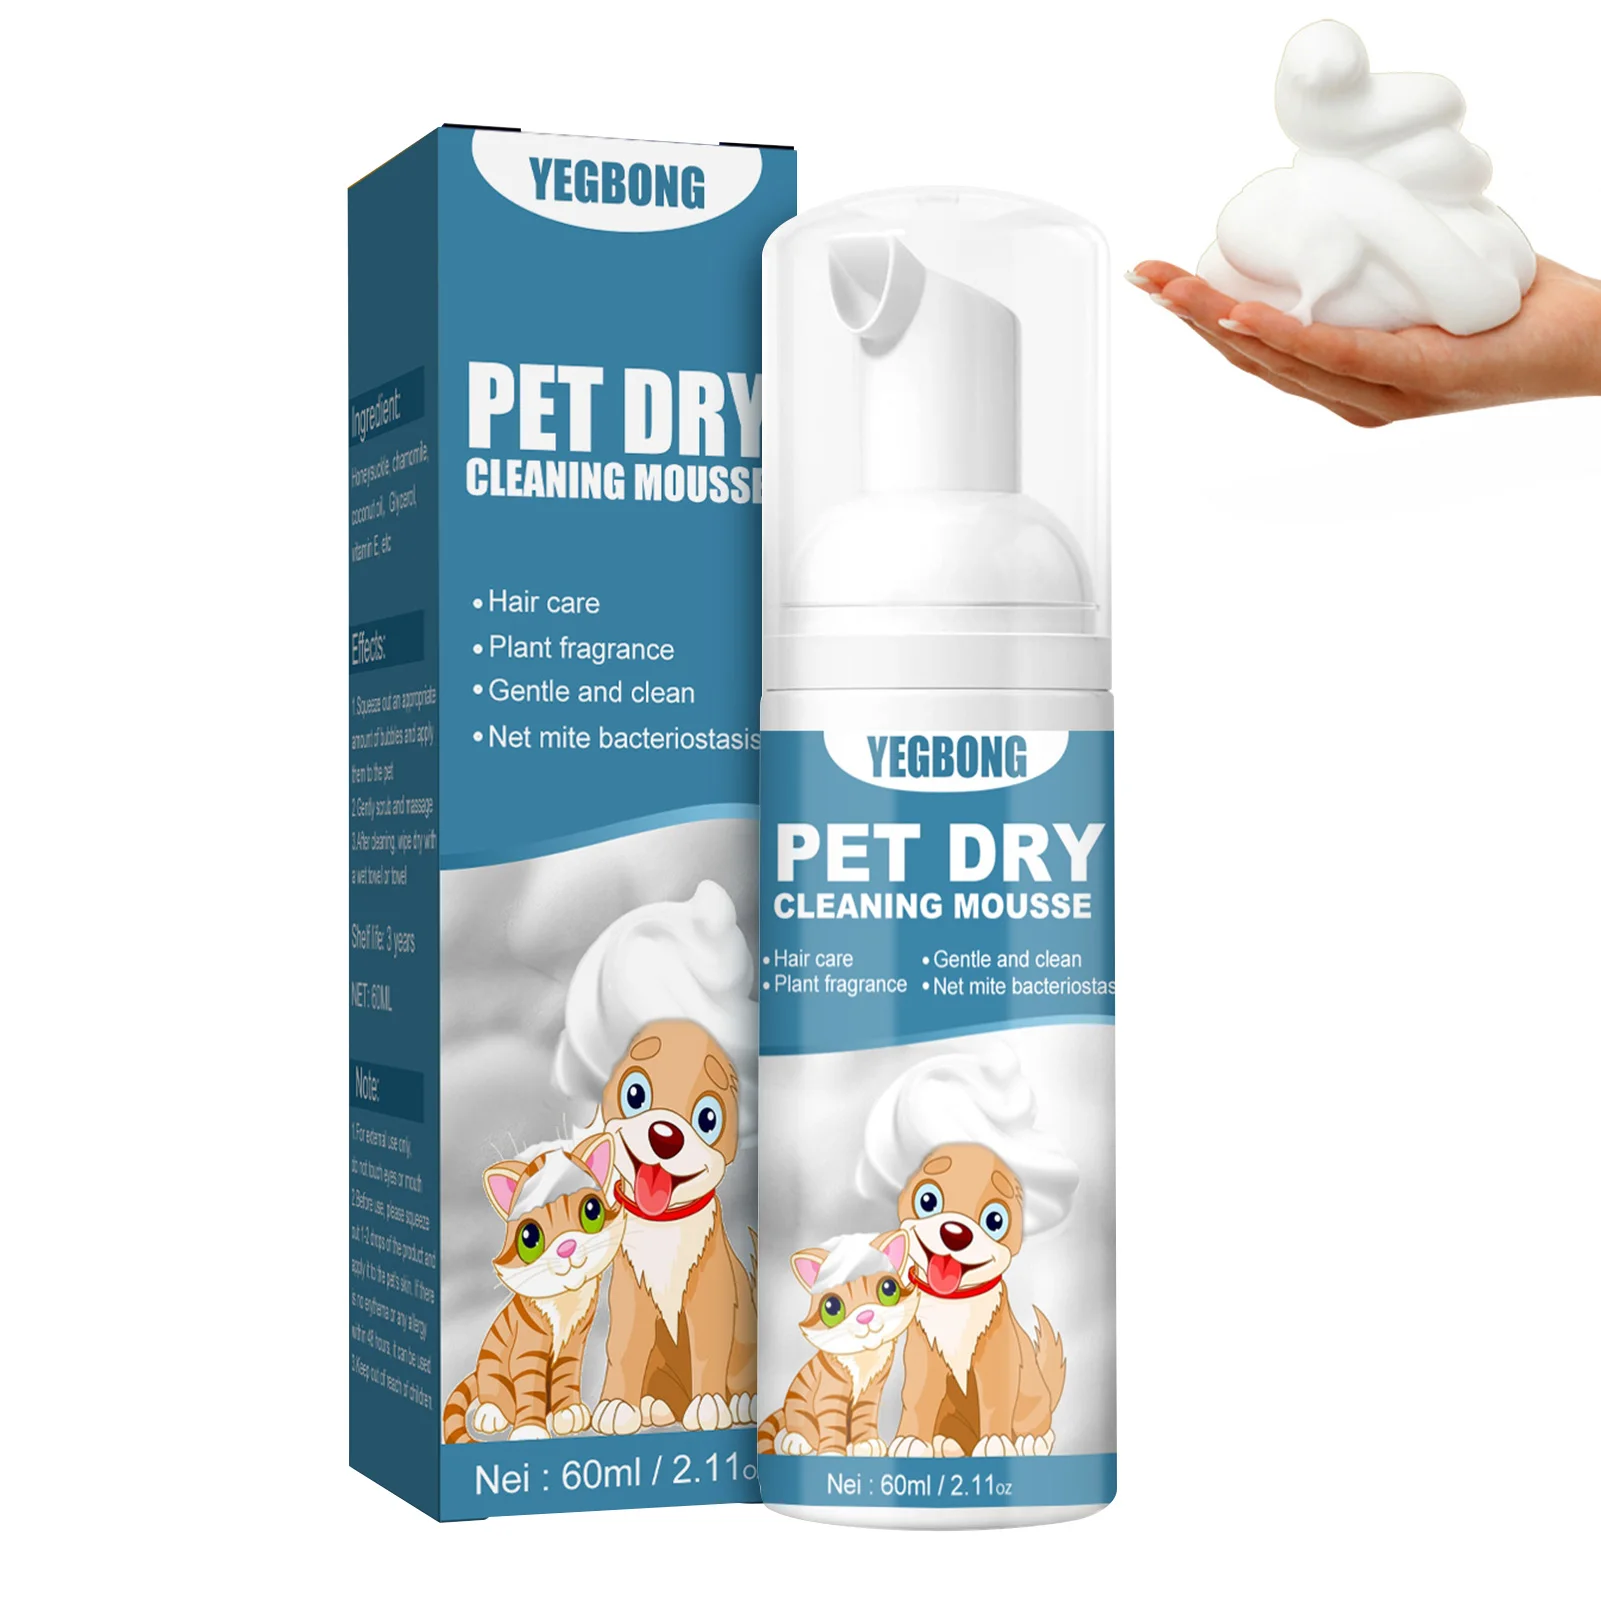 

60ml Cat Dry Shampoo Waterless Foam Cleaning Mousse For Cats Dogs Pet Grooming Supplies For Safe Bathless Cleaning And Odor